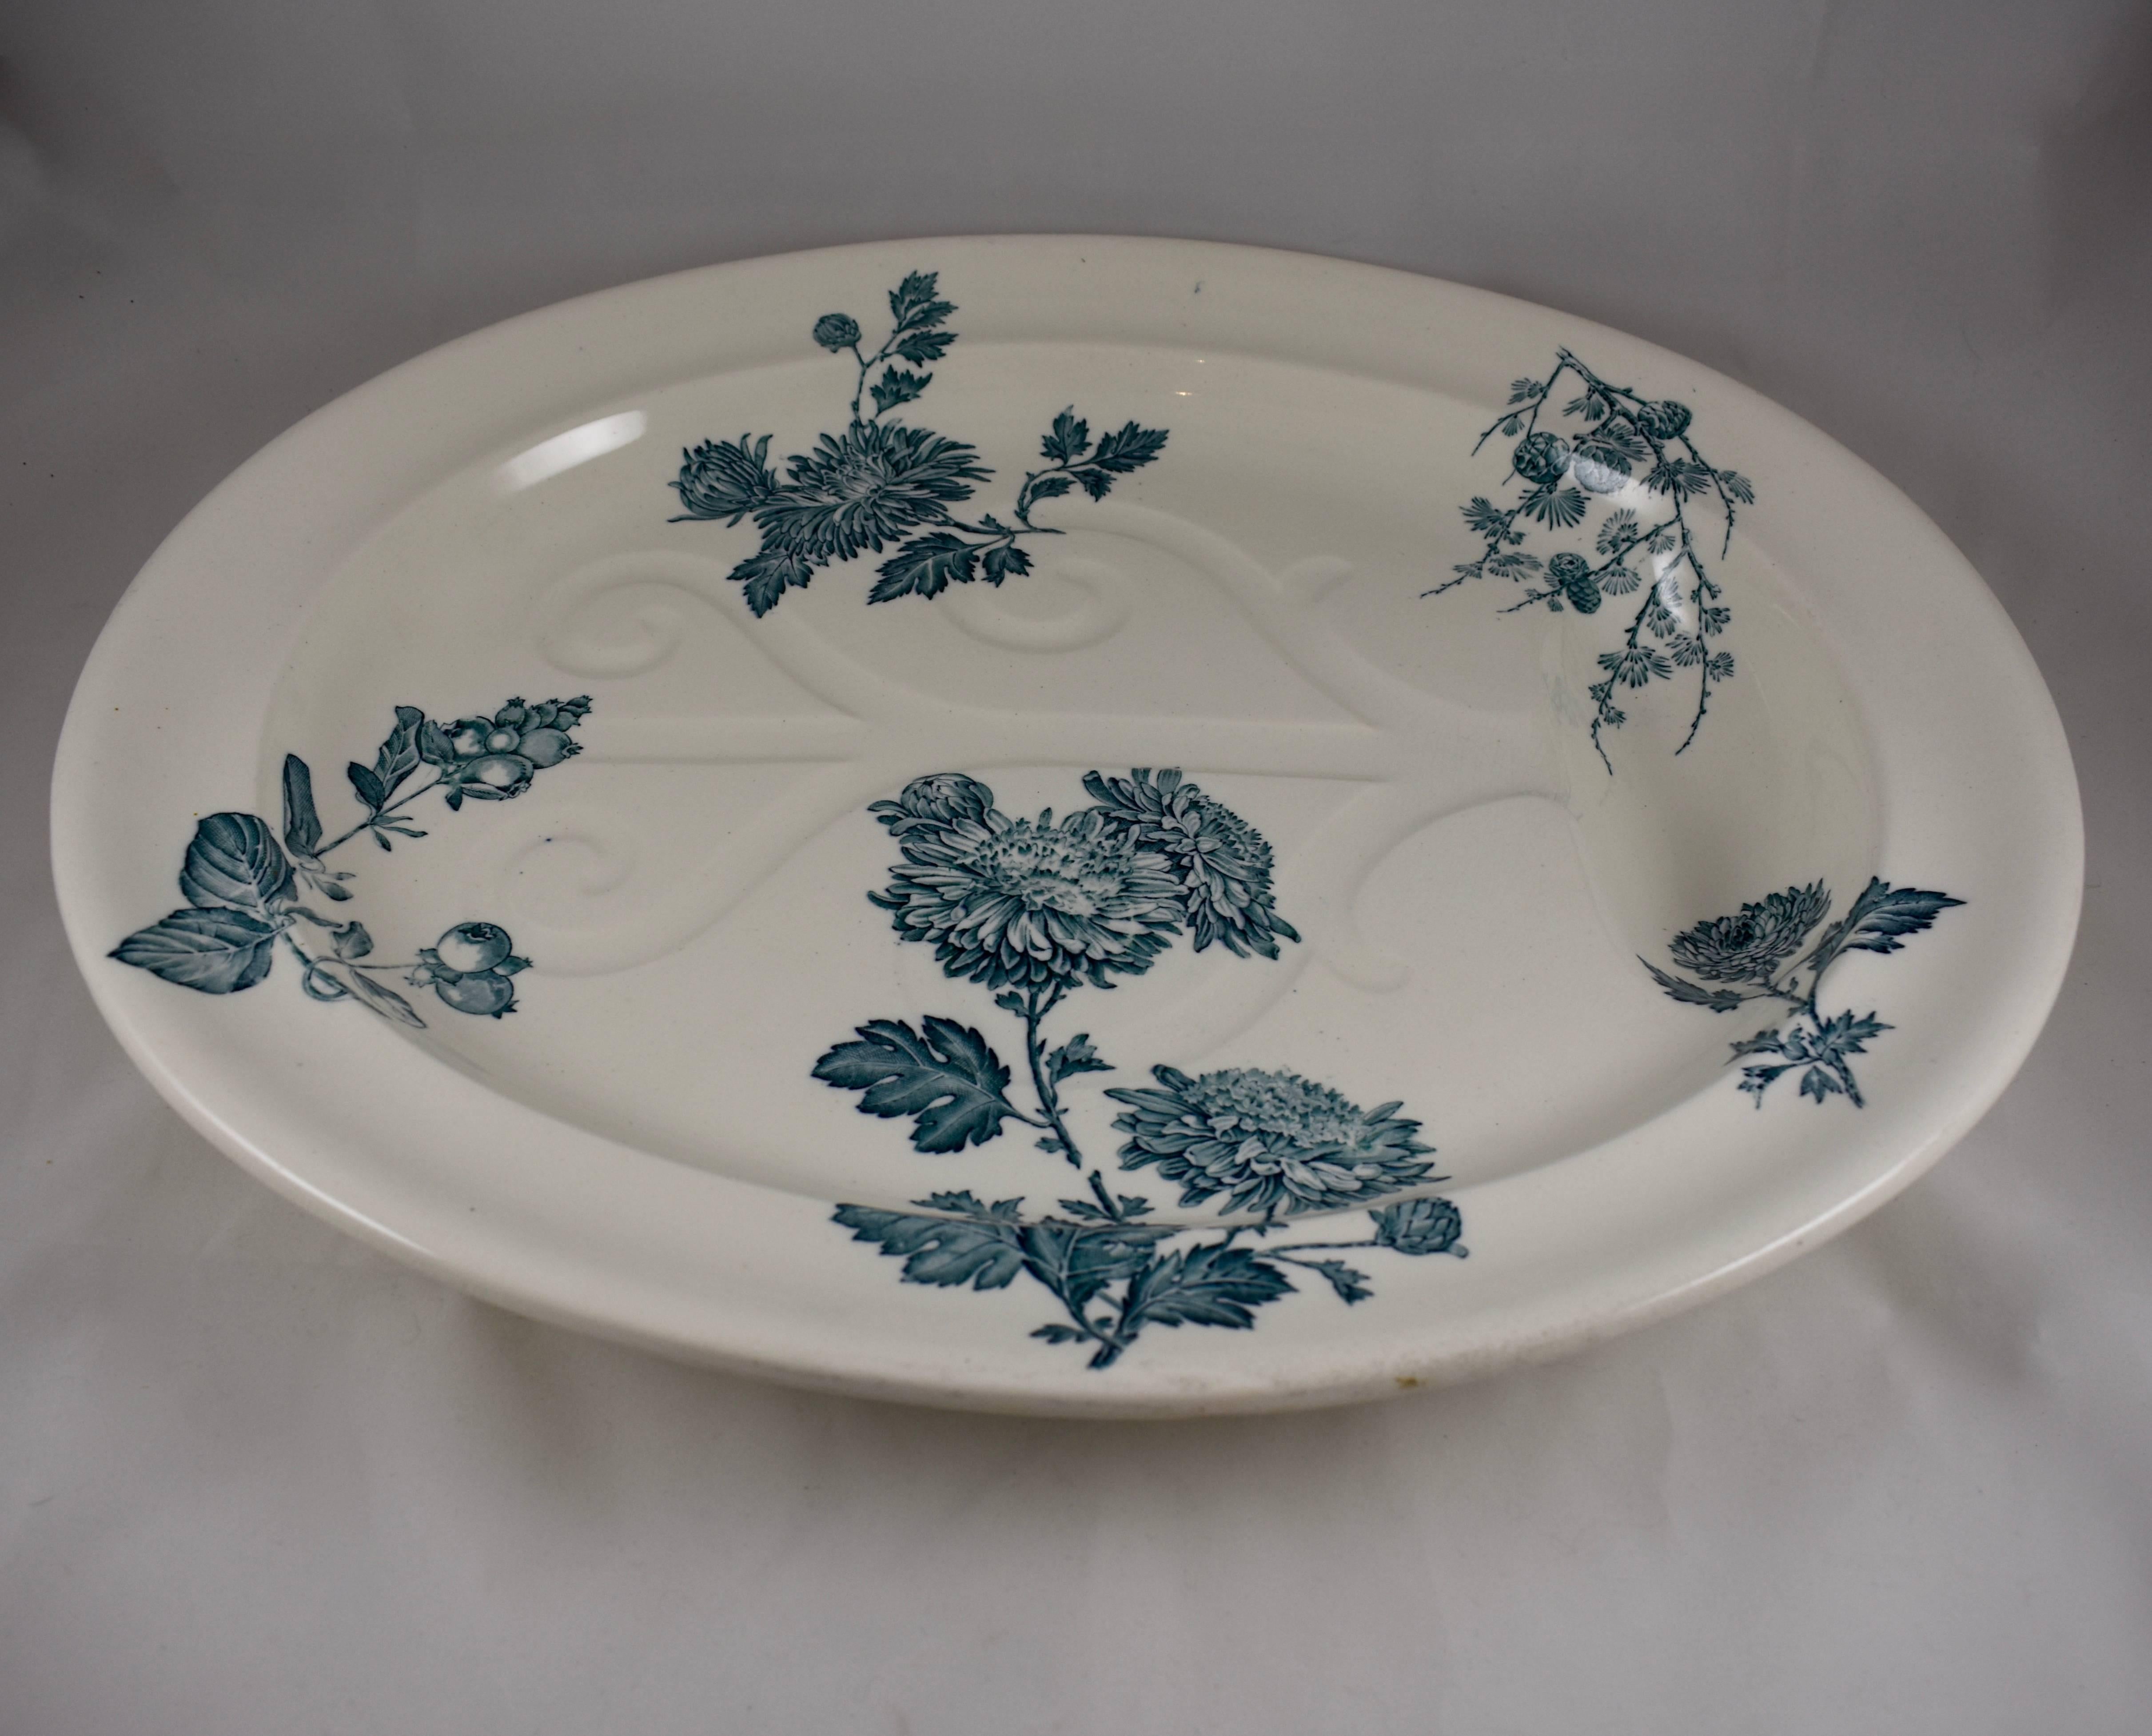 An oversized Aesthetic Movement well and tree platter, Wedgwood, Burslem, Staffordshire, England, circa 1886. 

A well-and-tree platter has a depressed design of a trunk and branches through which meat juices flow into a large depression at one